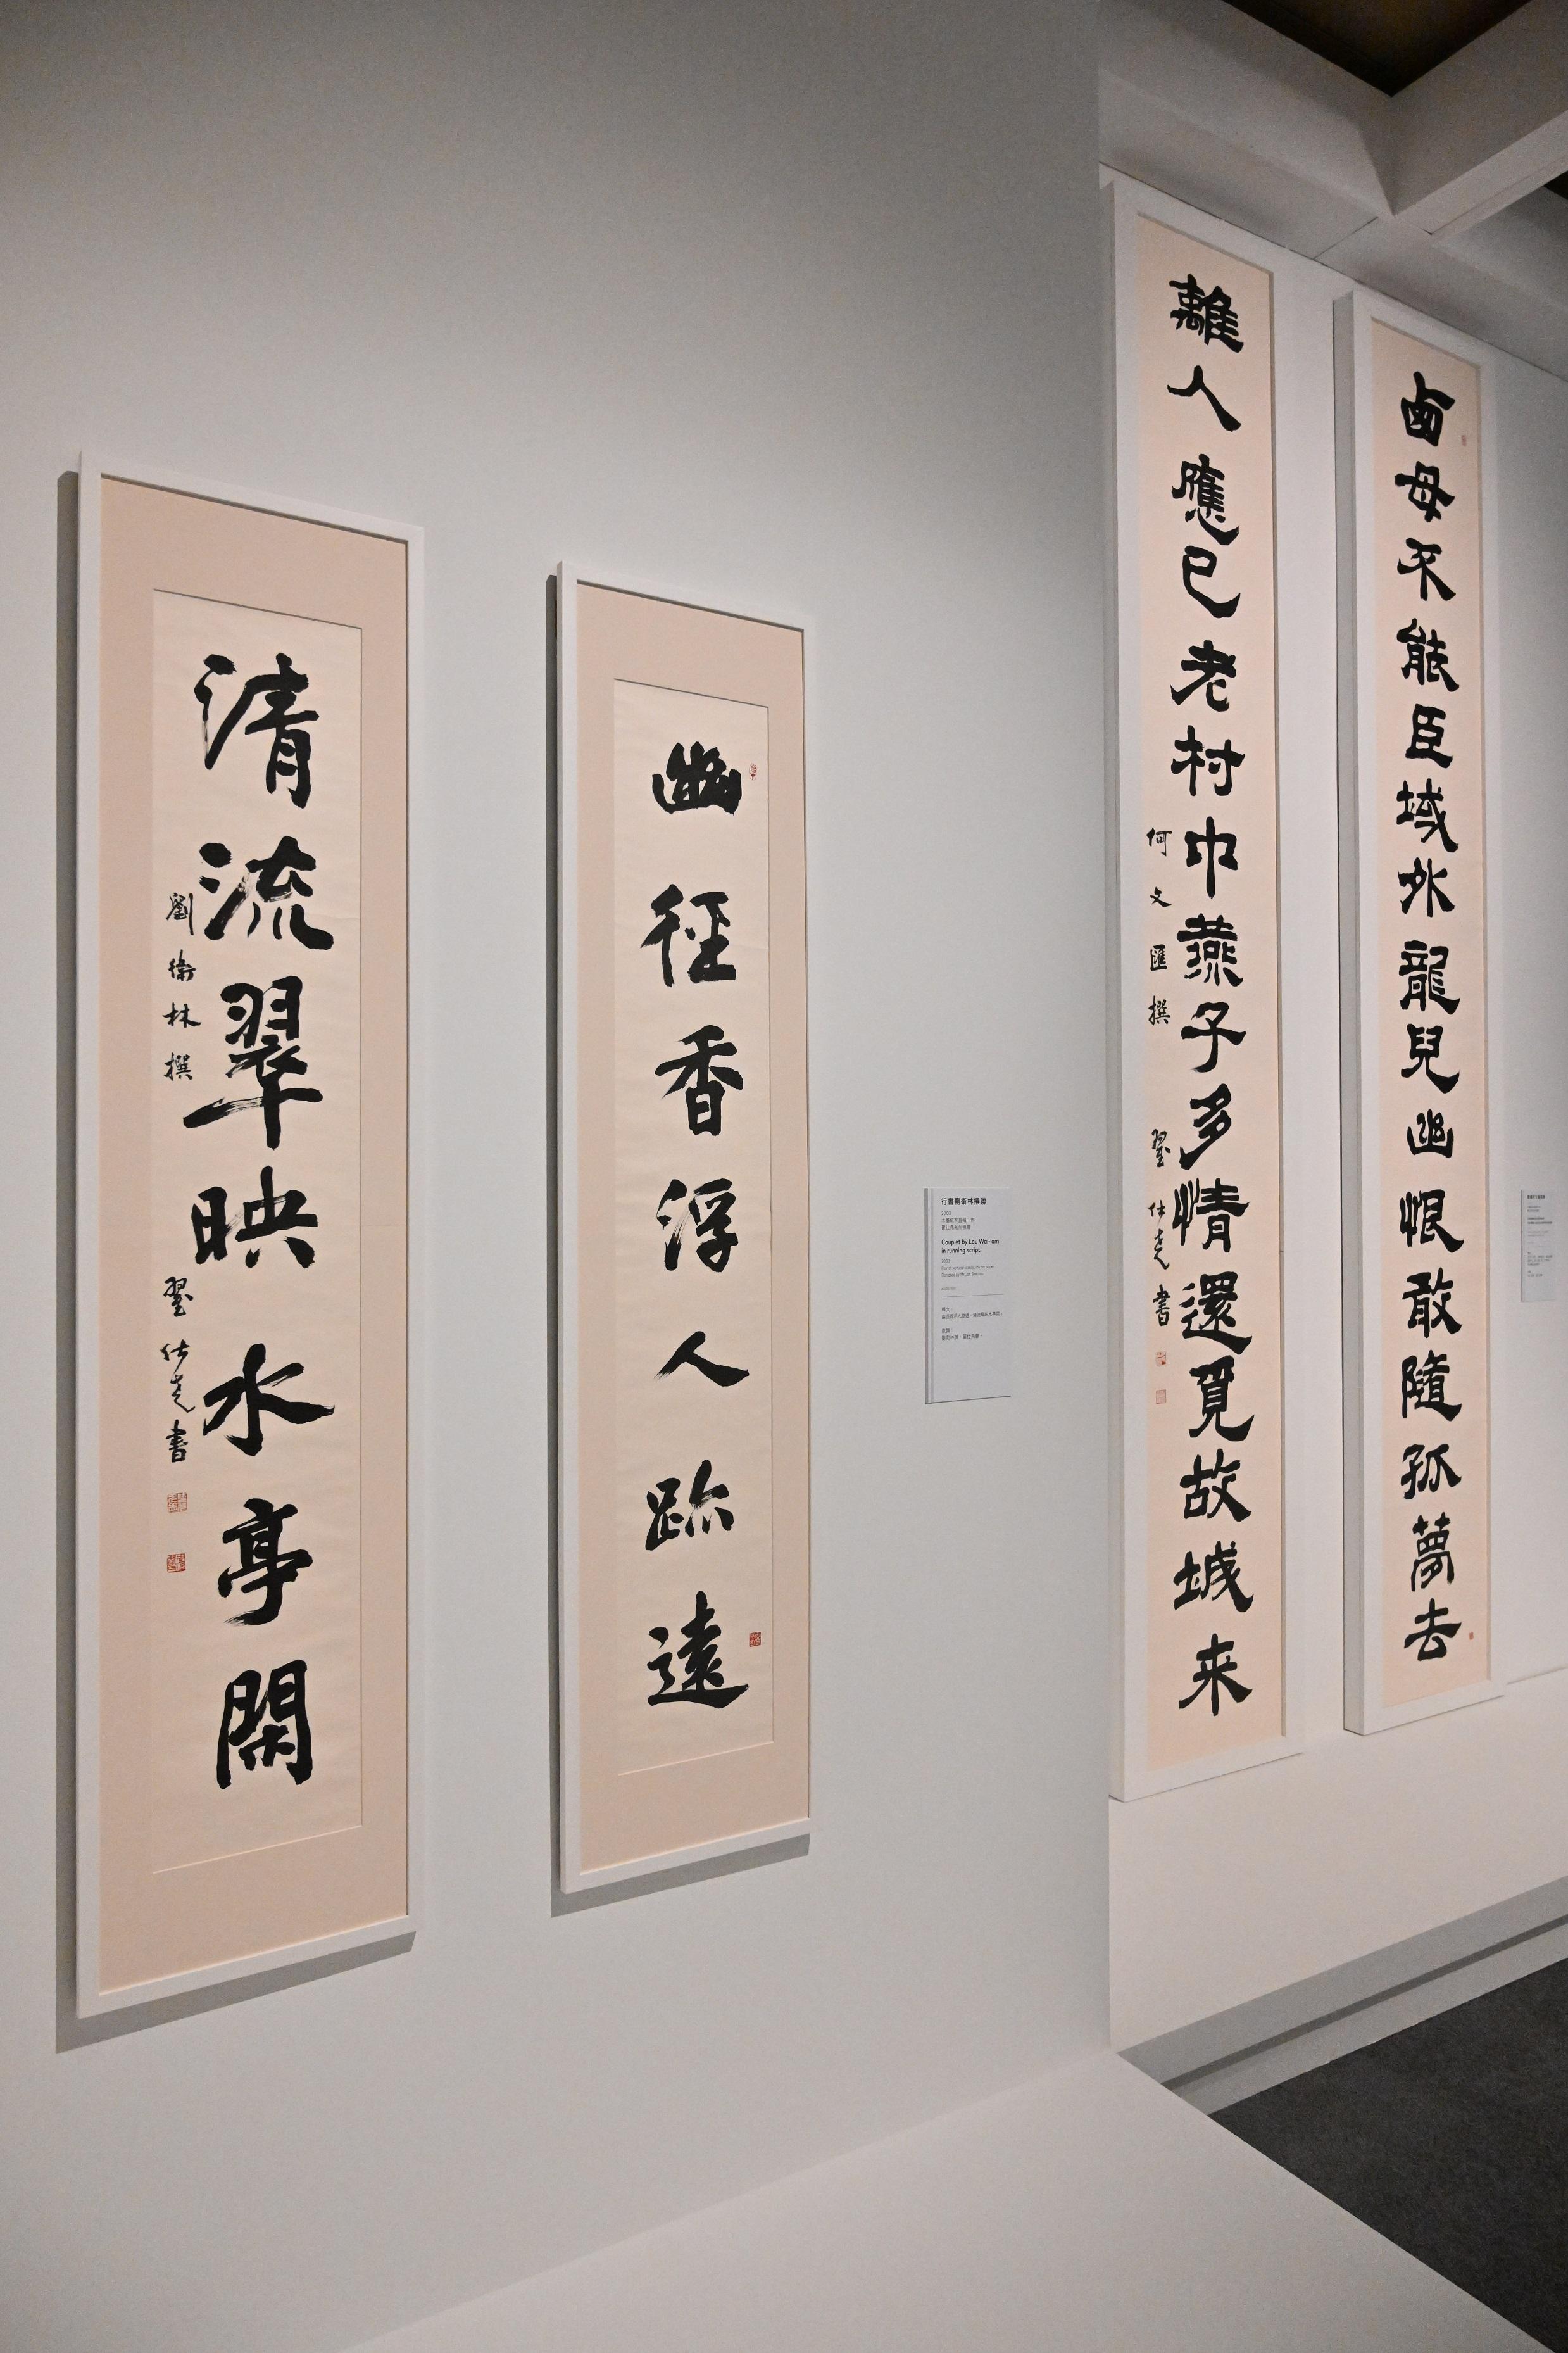 The opening ceremony of the "Boundless Universe: Calligraphy by Jat See-yeu" exhibition and donation ceremony was held today (December 7) at the Hong Kong Museum of Art. Photo shows his original ink on paper work of the couplets hung at the Kowloon Walled City Park, "Couplet by Lau Wai-lam in running script" and "Couplet by Richard Ho Man-wui".